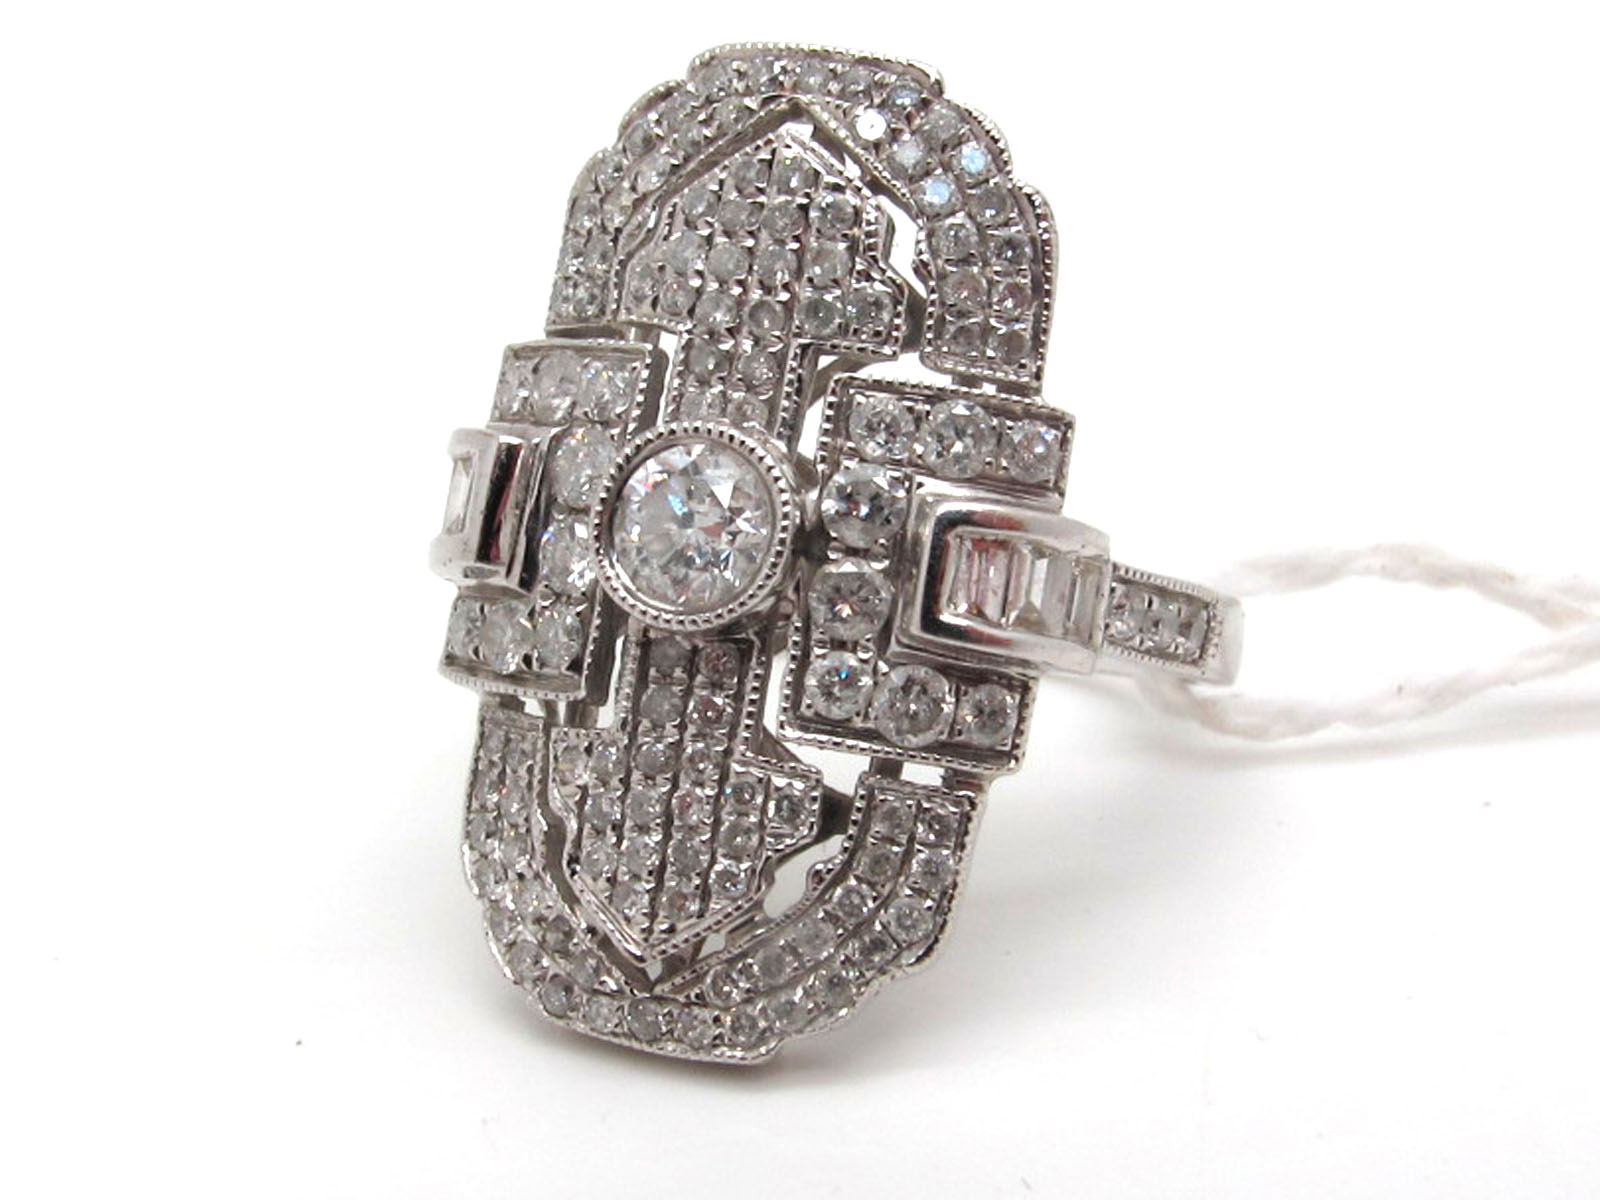 A Large Modern Art Deco Style Diamond Set Cocktail Dress Ring, the large panel set throughout with